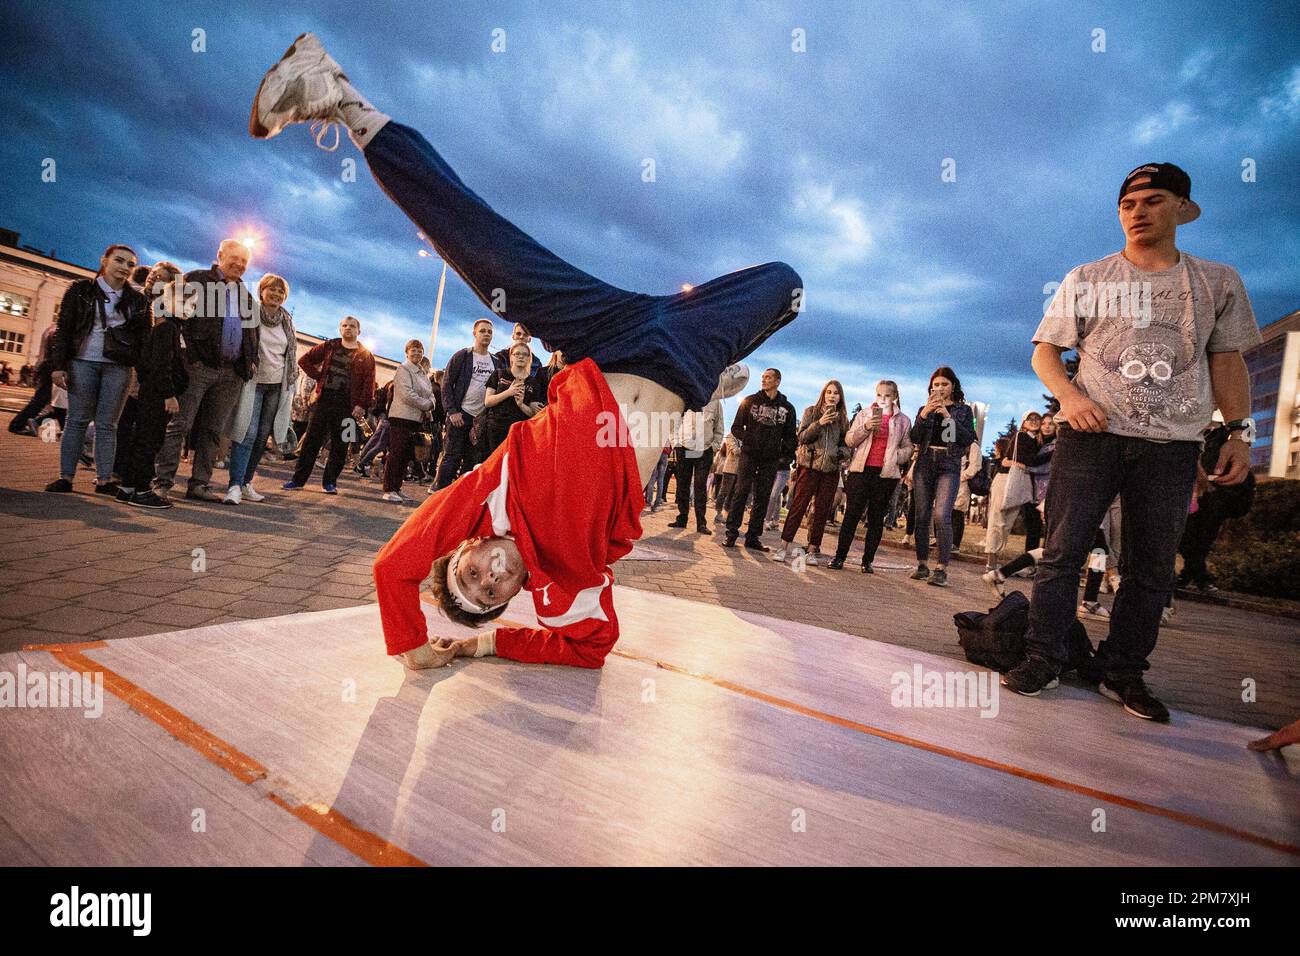 Minsk, Belarus. 3rd July, 2019. Konstantin and other b-boys start jamming. They quickly gather a curious audience and fill the street with hip-hop and funk music. 3rd July is the Independence Day of the Republic of Belarus. On this occasion each year, the authorities organize a military parade that follows Minsk's arteries. In this sublime time the city becomes a space of contrasts between dozens of soldiers and regular Belarusians, trying to live their normal lives. This cycle shows diversity of young Belarussian society.This project was shot in 2019 around the celebrations, and it meant to Stock Photo